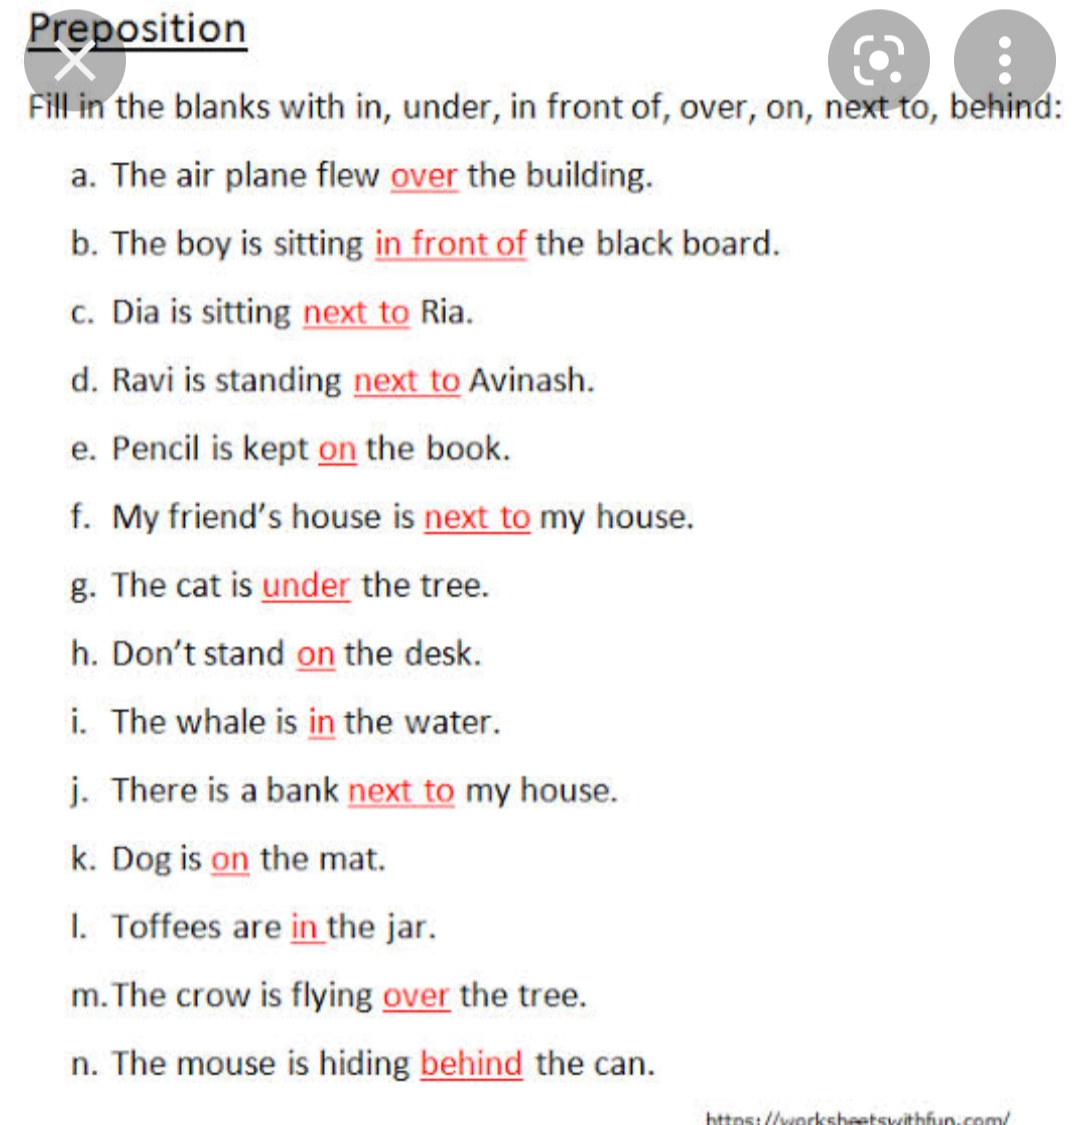 prepositions-worksheets-with-answers